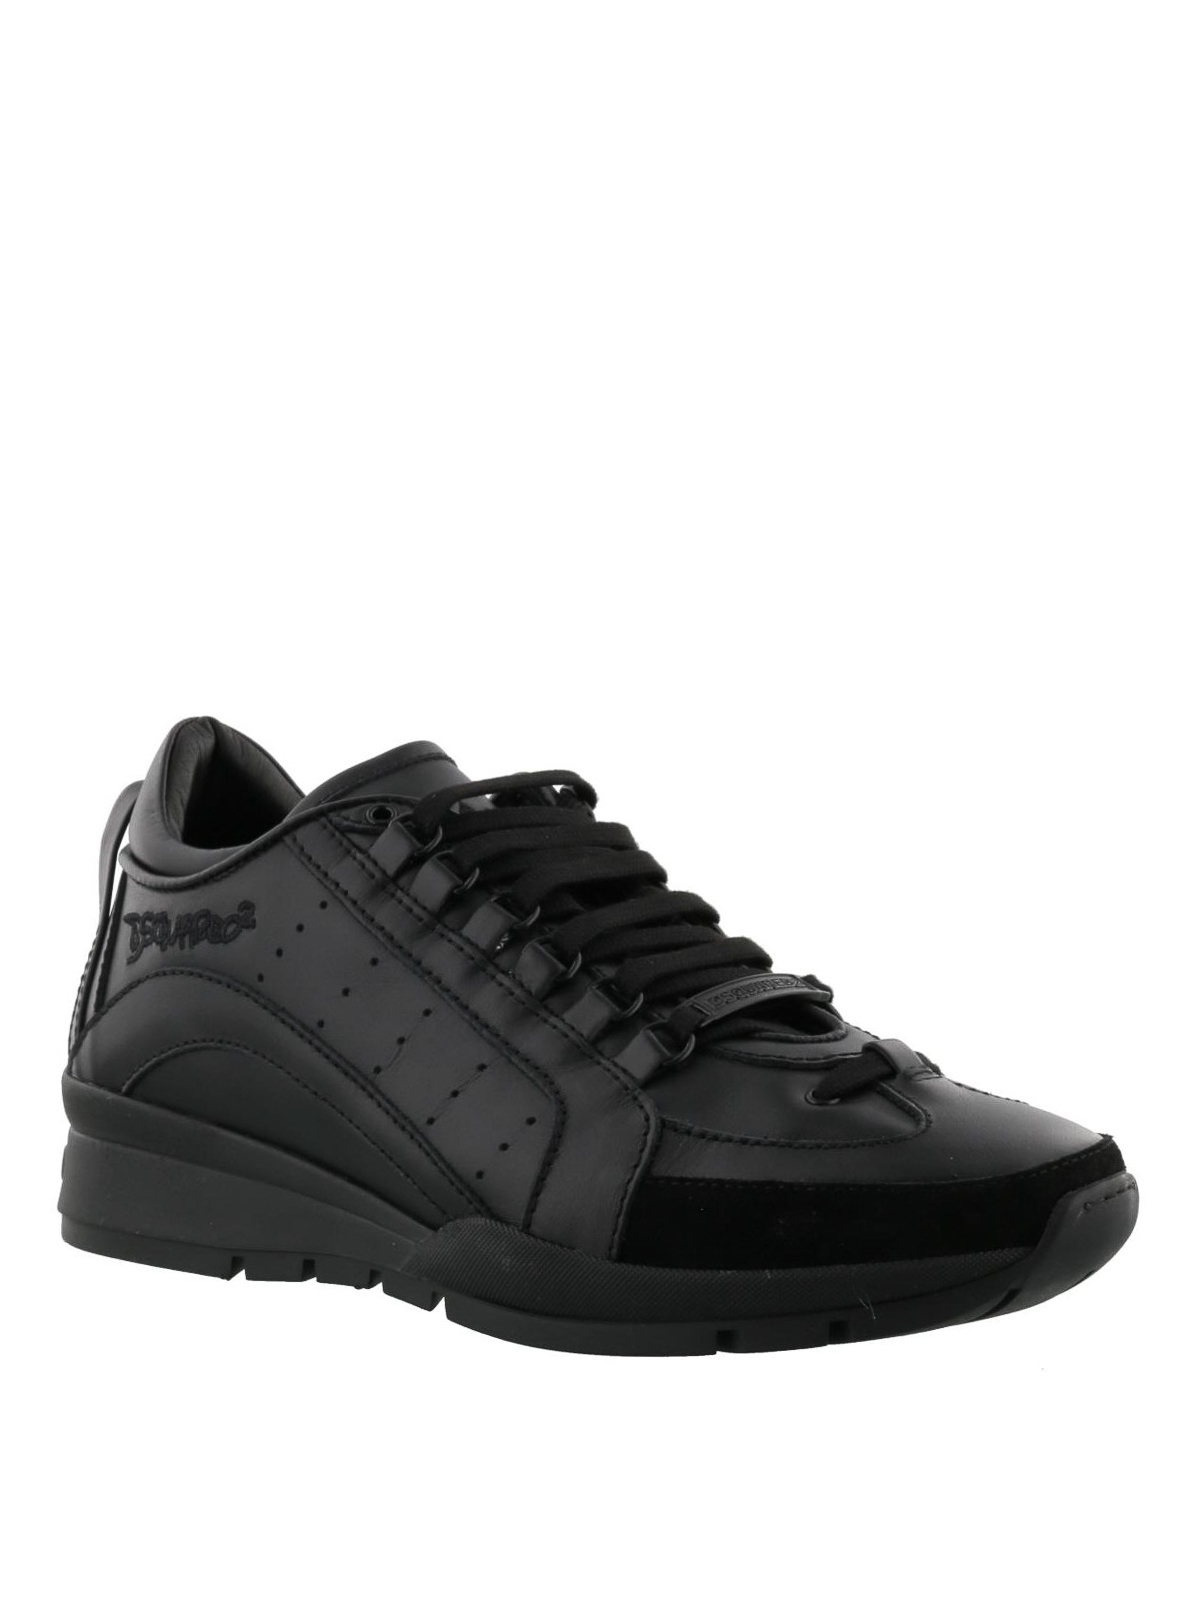 Dsquared2 - 551 black leather sneakers 